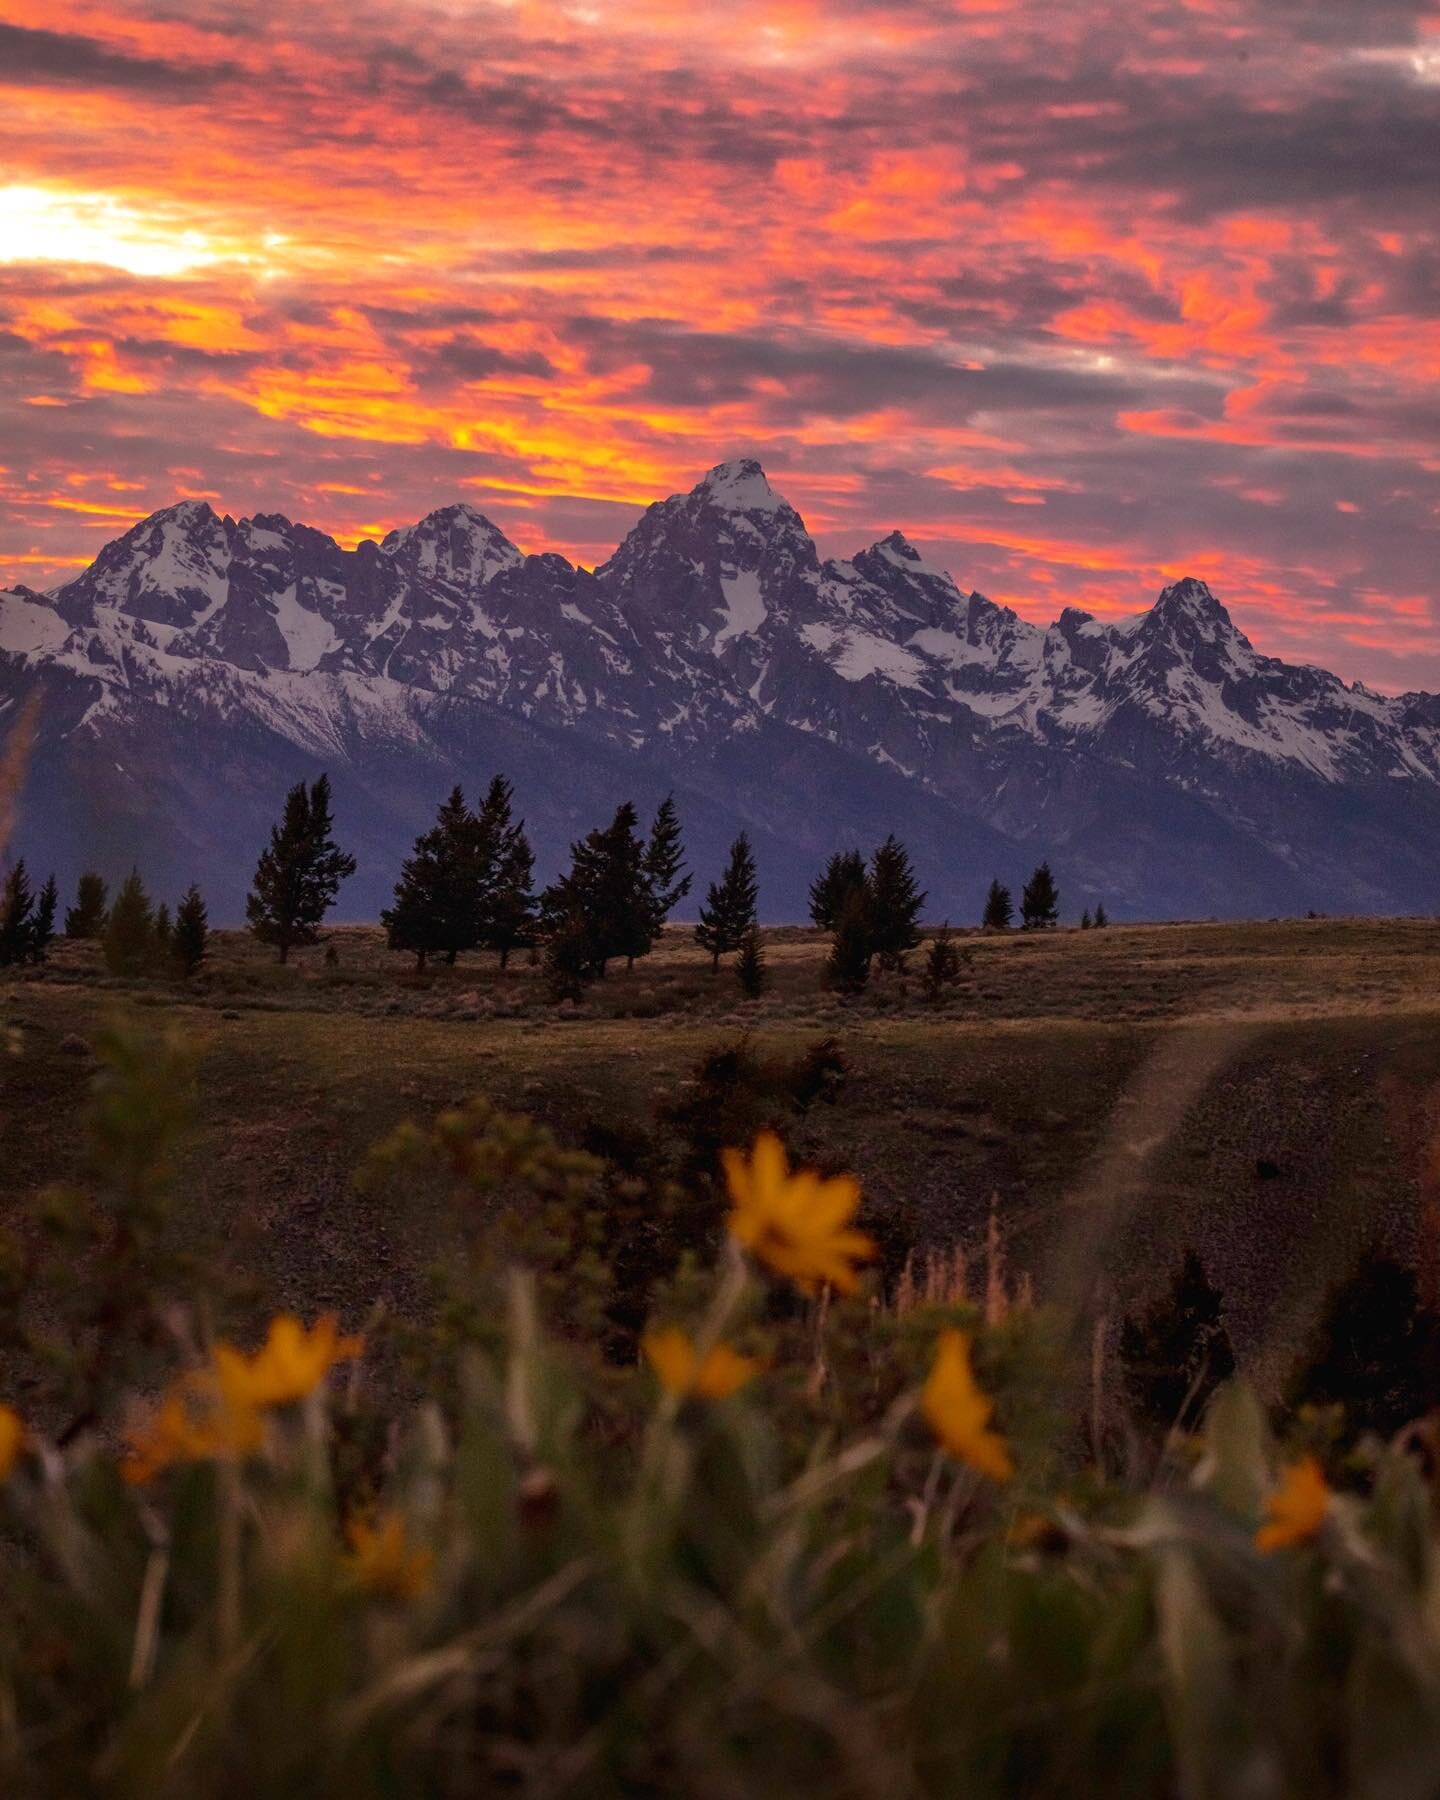 Spring has sprung in the Tetons, it made me so incredibly excited for a summertime outdoors